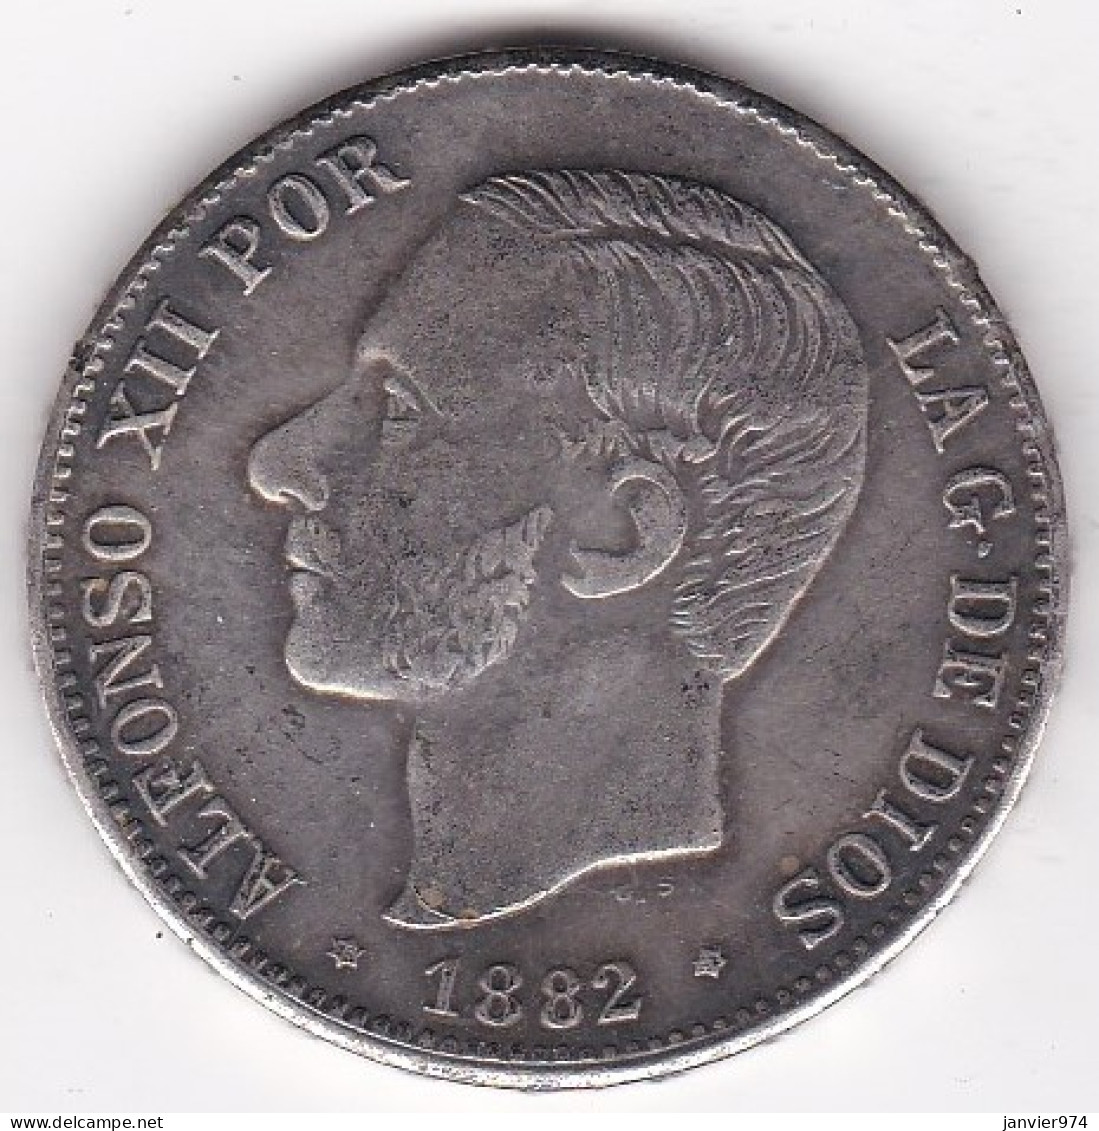 Fausse - False . 5 Pesetas 1882 PG.M. Alfonso XII , 38 Mm, 21,3 G , Magnétique - Counterfeits